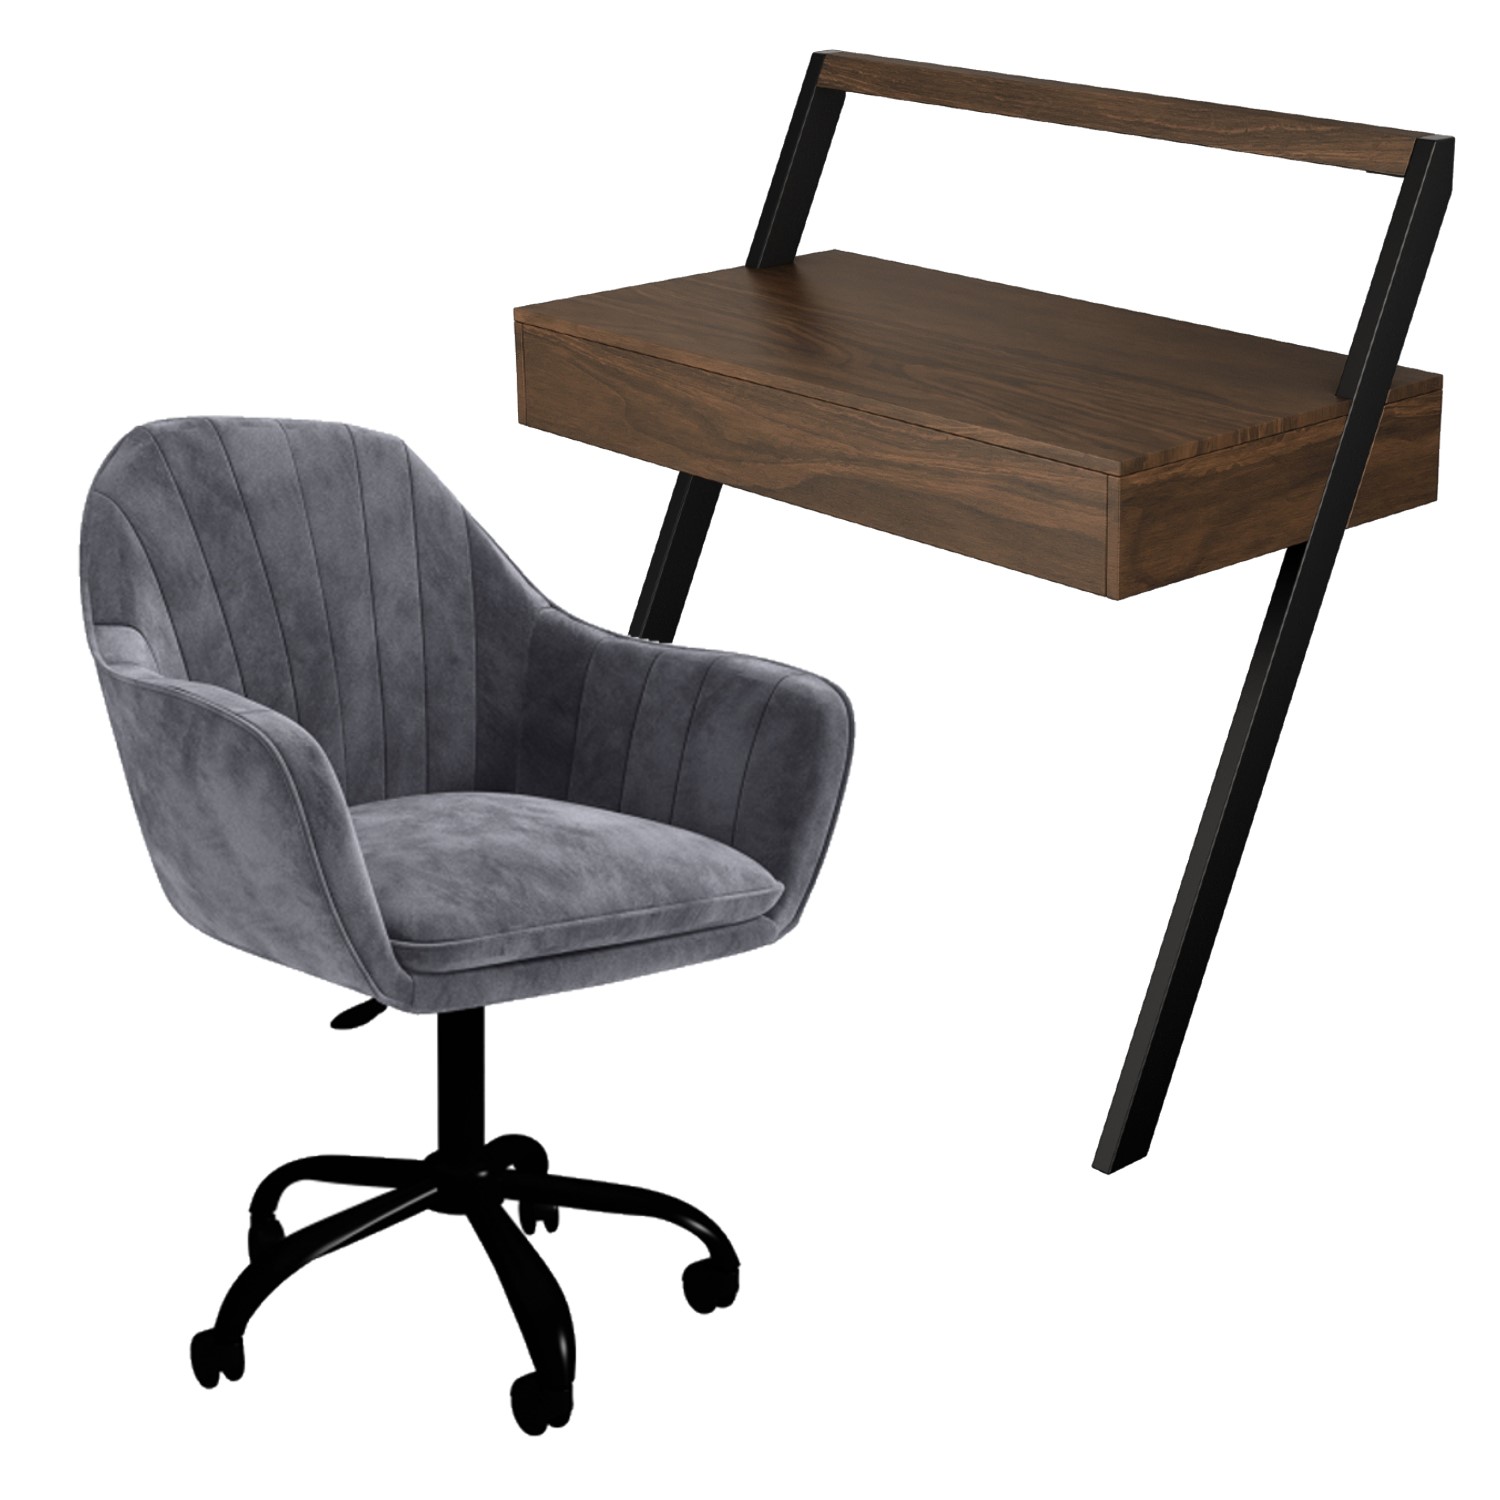 Photo of Walnut & grey velvet office leaning desk and chair set - nico